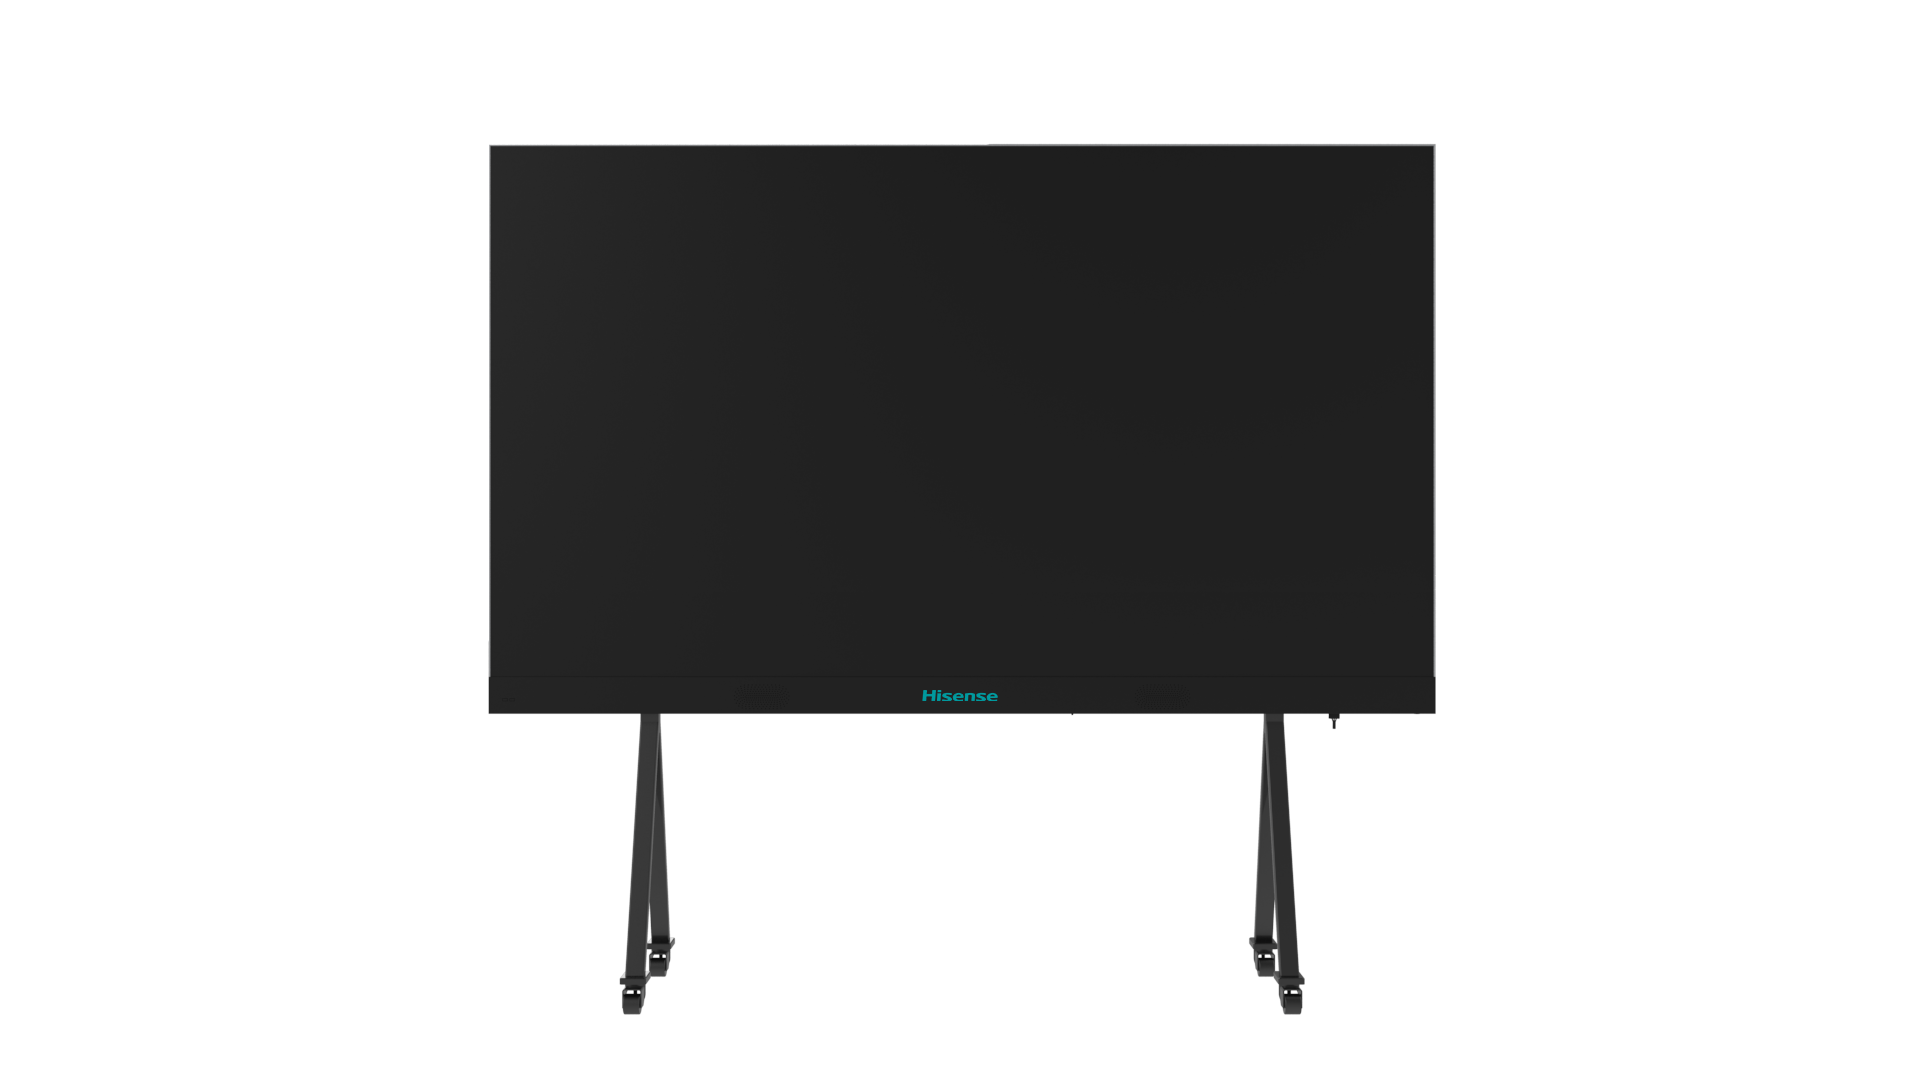 Hisense HAIO138 LED All in One Display - 138 inch - 1.59 mm PP - 500 cd/m² - Full-HD - 1920 x 1080 - LED display - with trolley